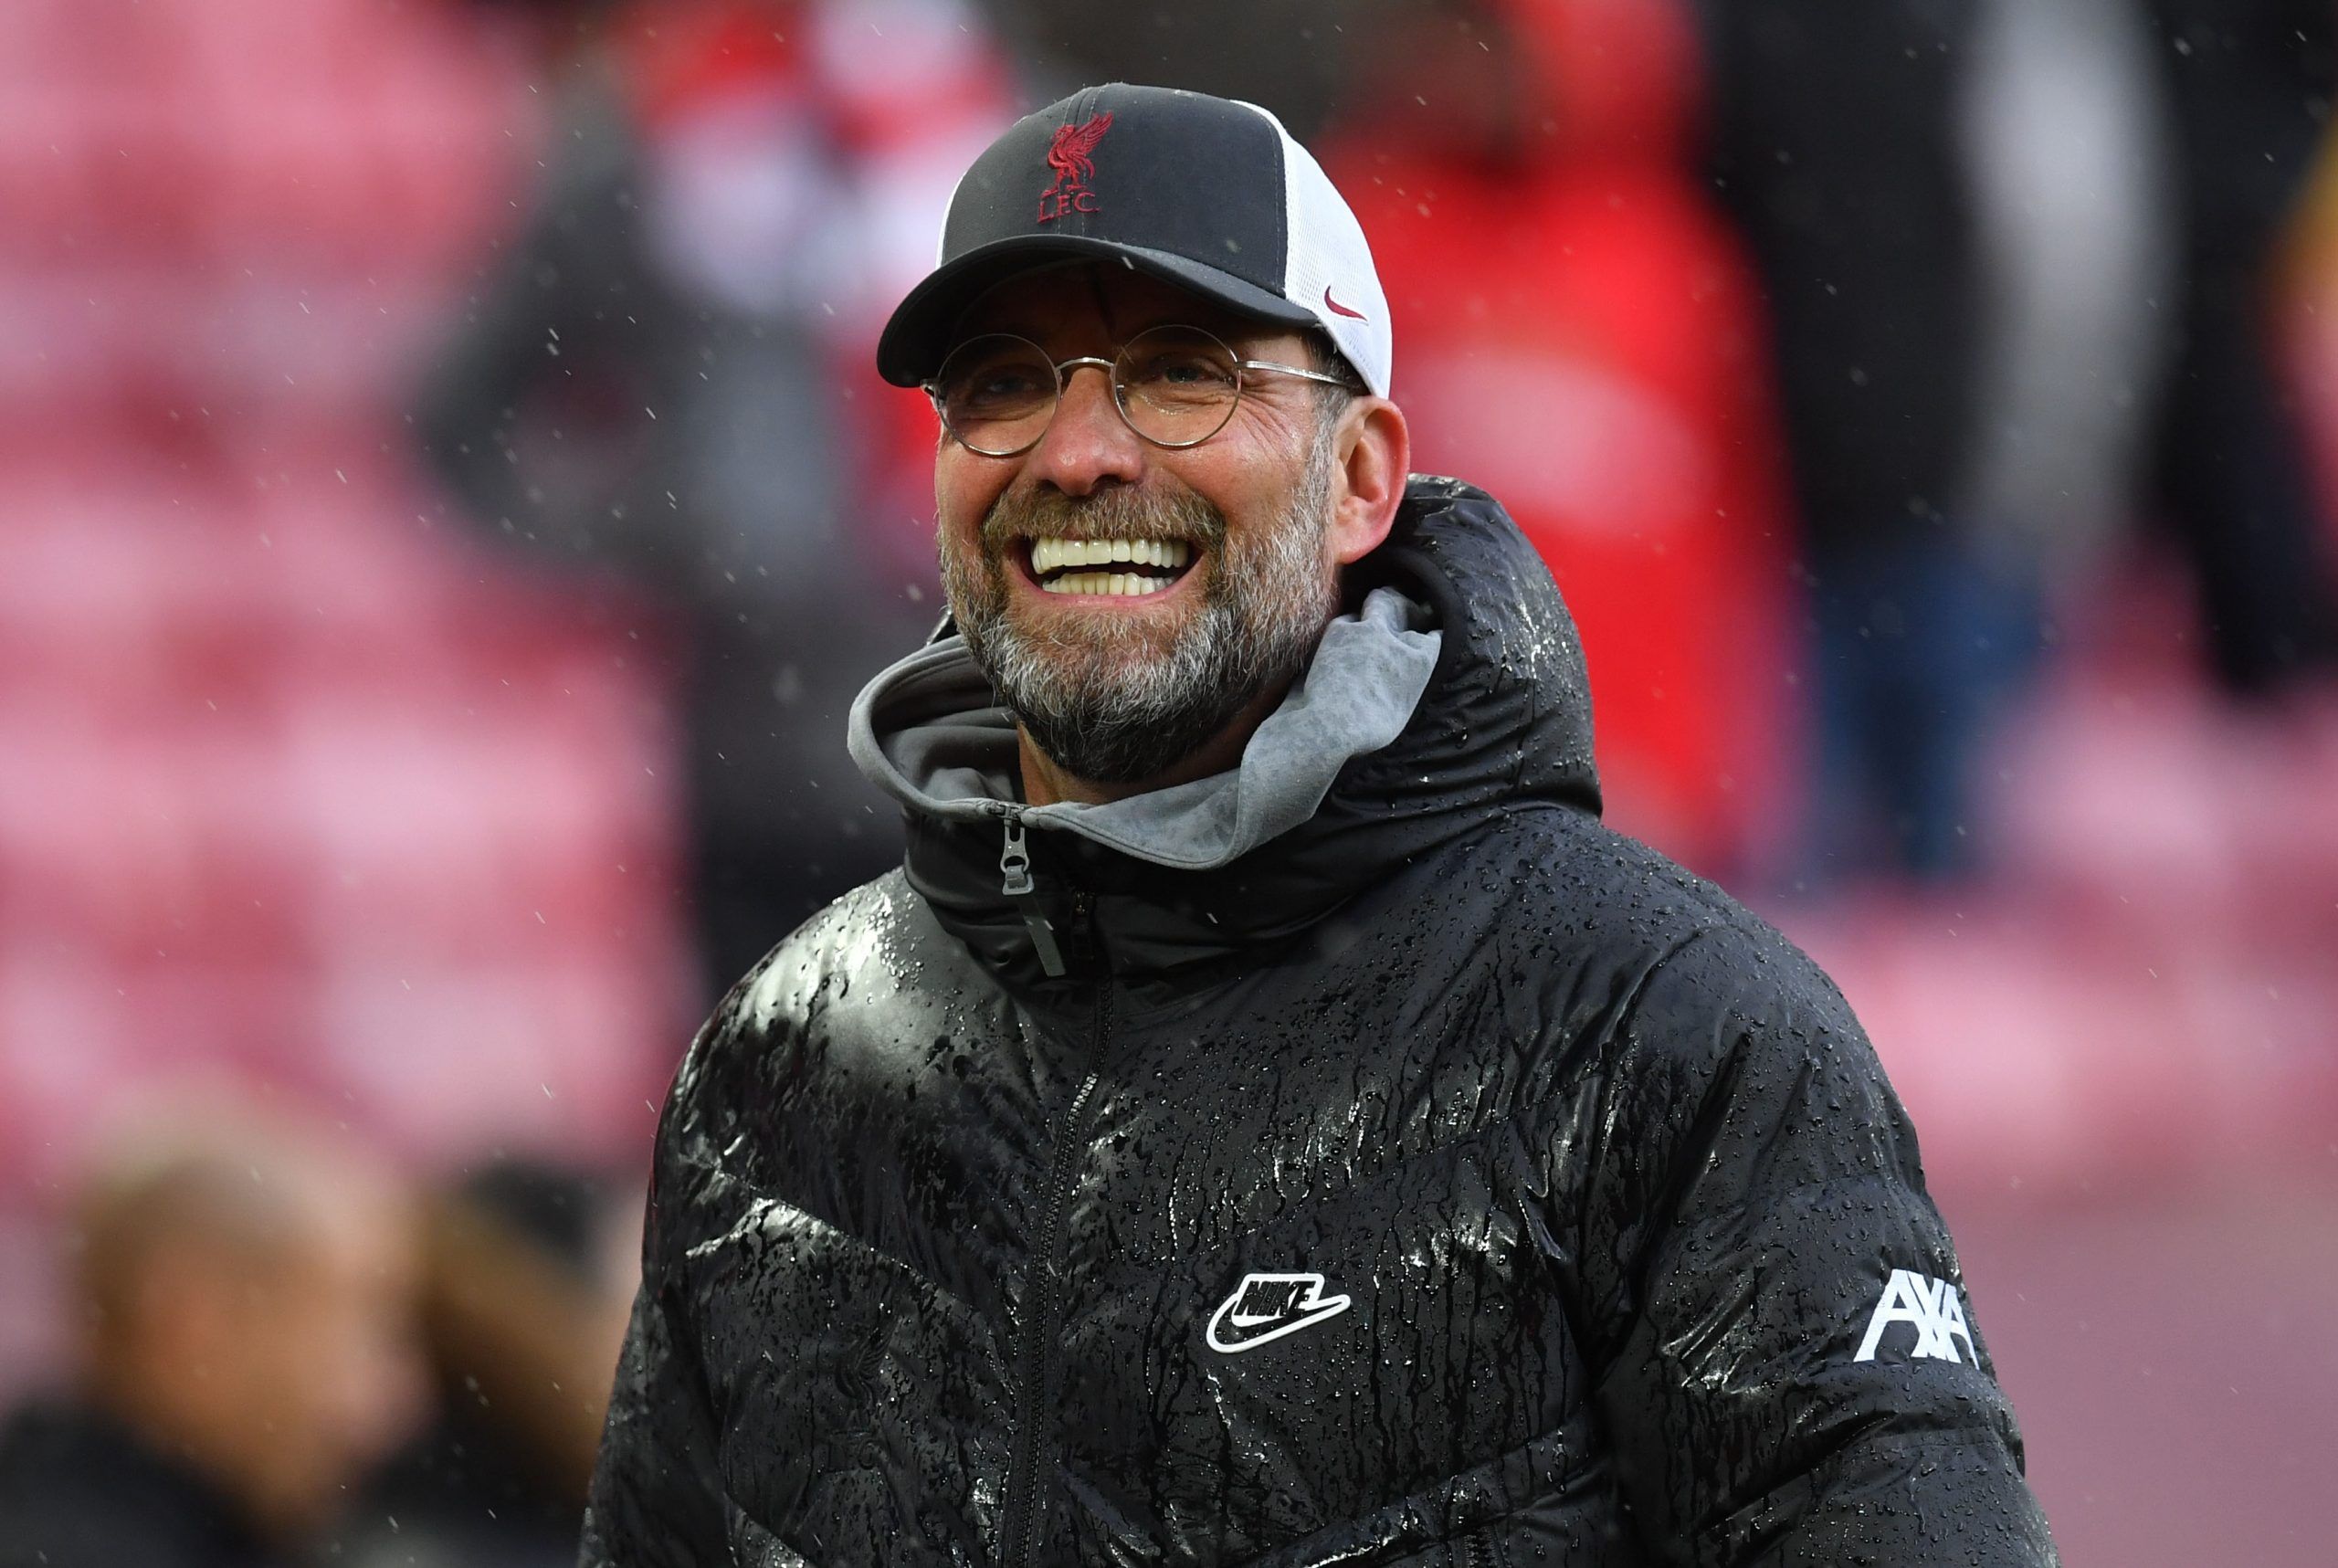 Liverpool manager Jurgen Klopp celebrates after winning the match and qualifying for the UEFA Champions LeagueSoccer Football - Premier League - Liverpool v Crystal Palace - Anfield, Liverpool, Britain - May 23, 2021 Liverpool manager Juergen Klopp celebrates after winning the match and qualifying for the UEFA Champions League Pool via REUTERS/Paul Ellis EDITORIAL USE ONLY. No use with unauthorized audio, video, data, fixture lists, club/league logos or 'live' services. Online in-match use limit